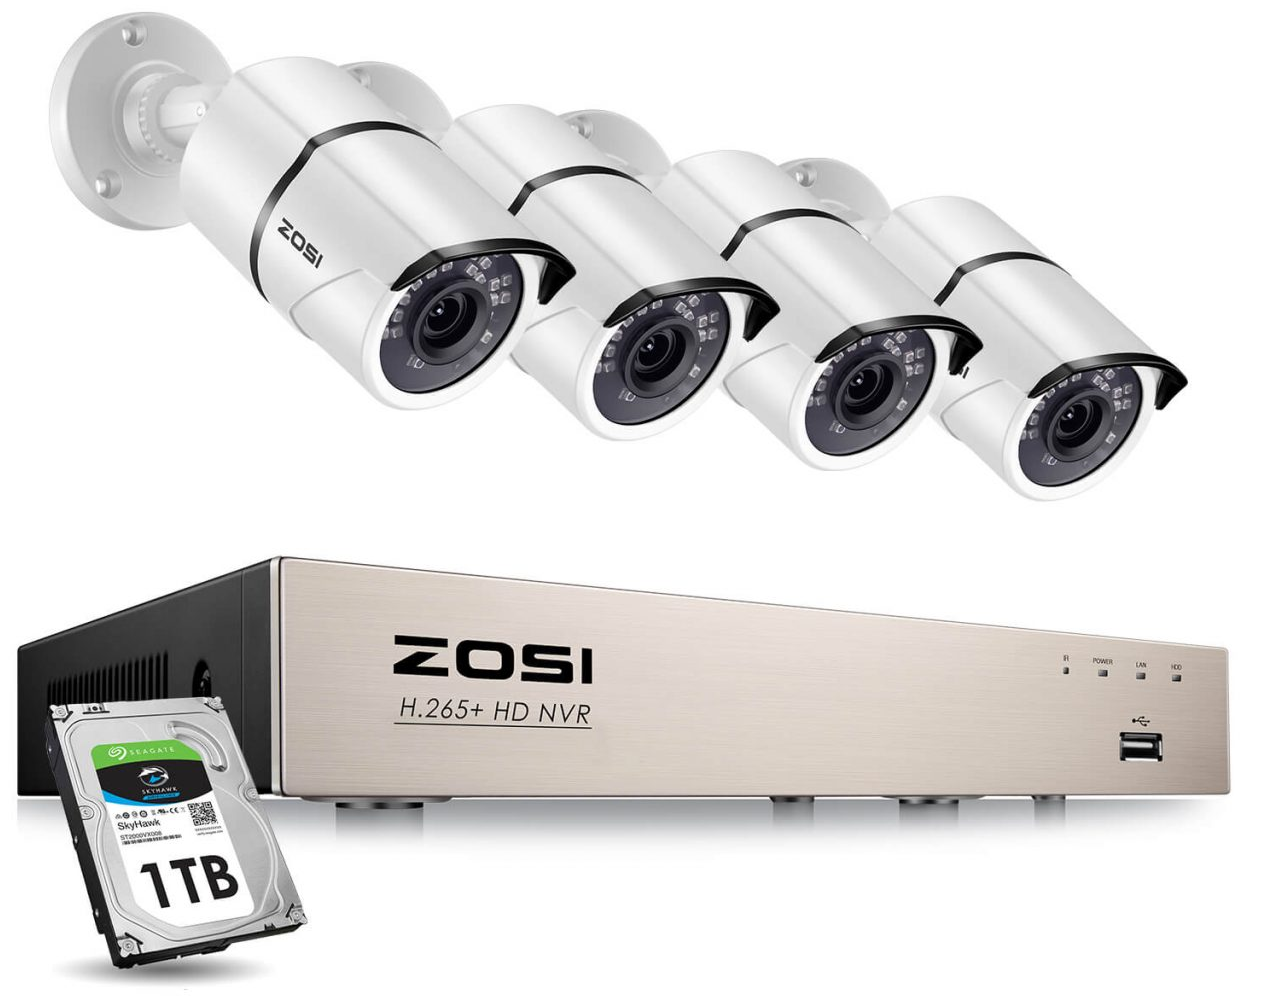 Figure 42: Zosi offers many configurations, including this one, which uses 5 megapixel cameras connected to a 1 TB NVR.